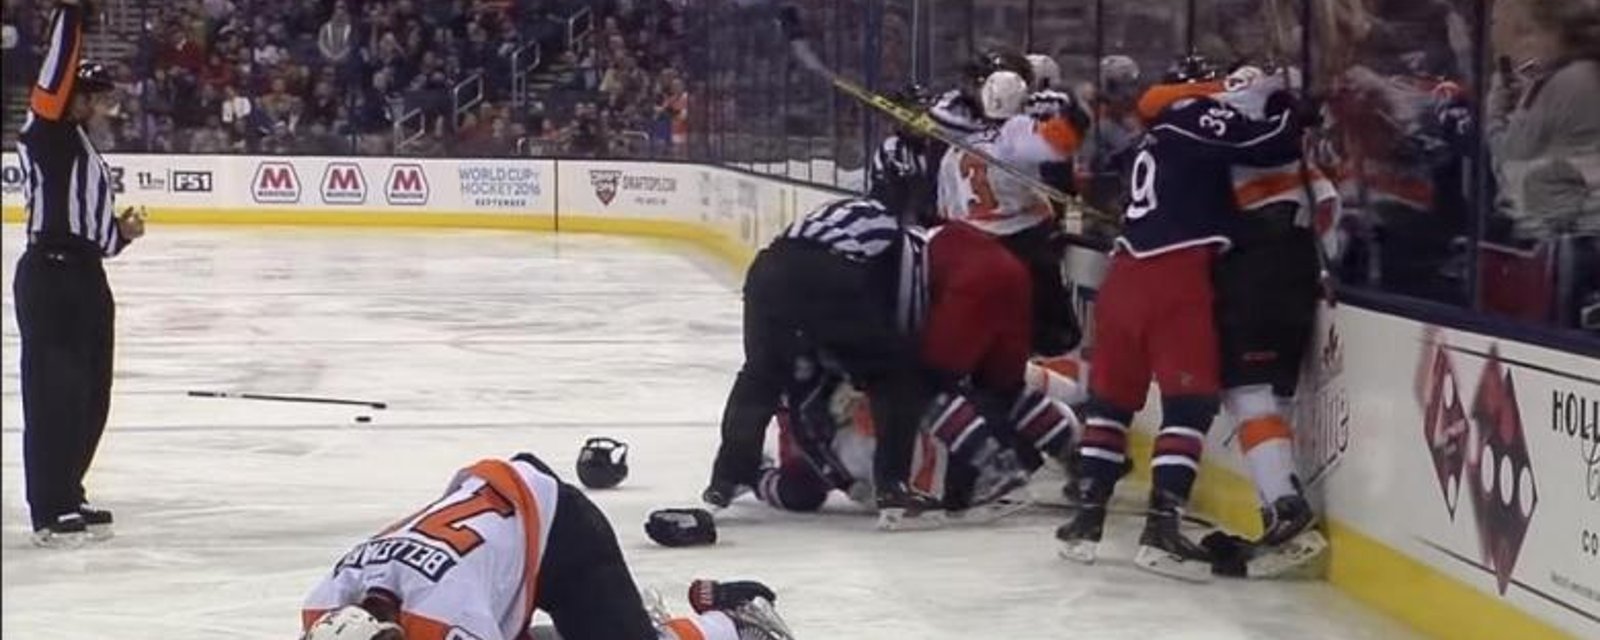 Breaking: Boll will face possible suspension for crushing hit last night.